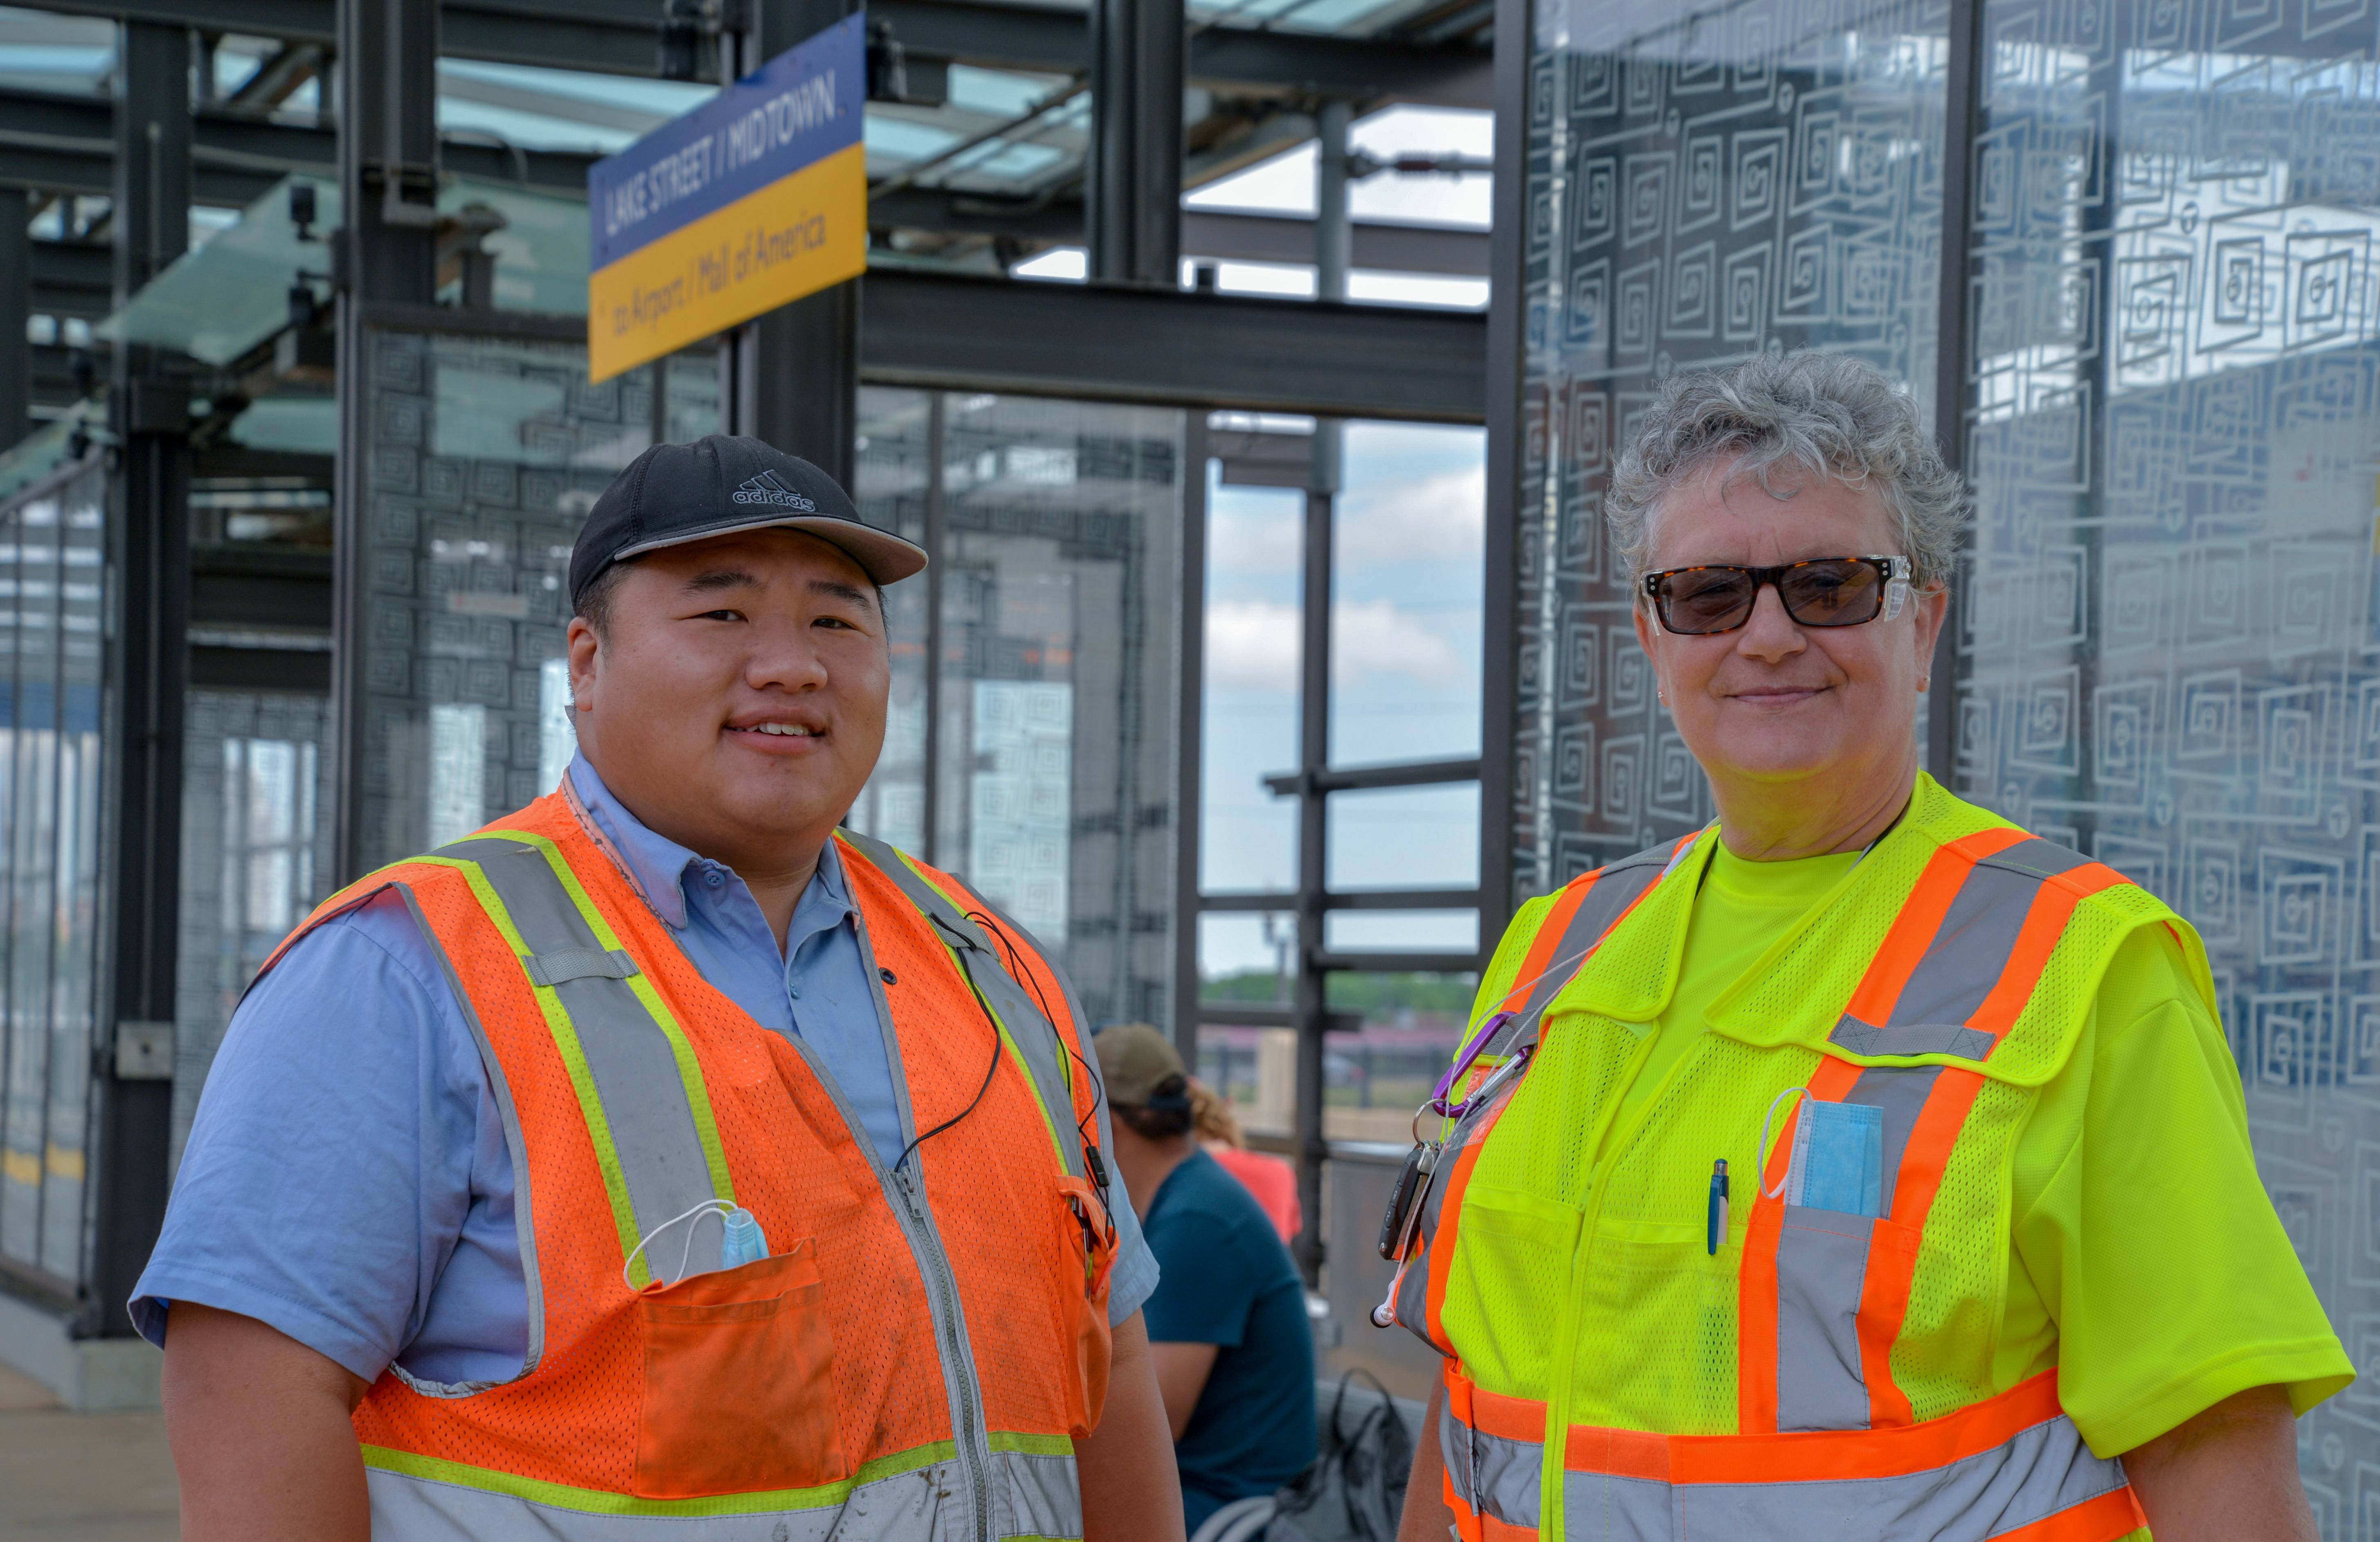 Public Facility Workers Chang Yang and Julie Mickus at the Lake Street Station. 